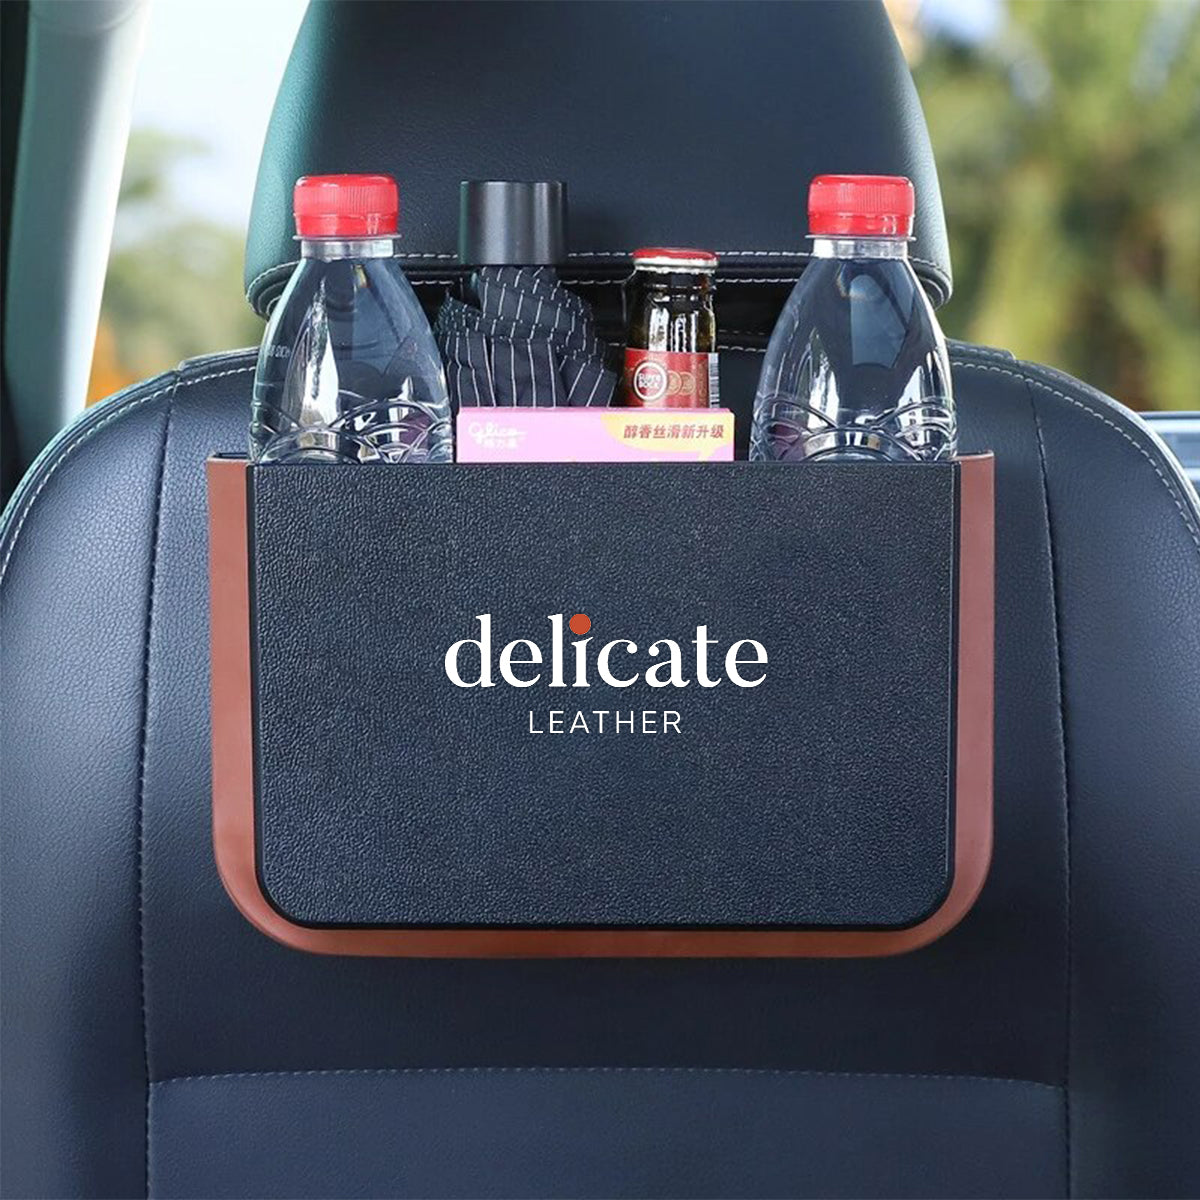 Delicate Leather Hanging Waterproof Car Trash can-Foldable, Custom For Your Cars, Waterproof, and Equipped with Cup Holders and Trays. Multi-Purpose, Car Accessories FJ11992 - Delicate Leather